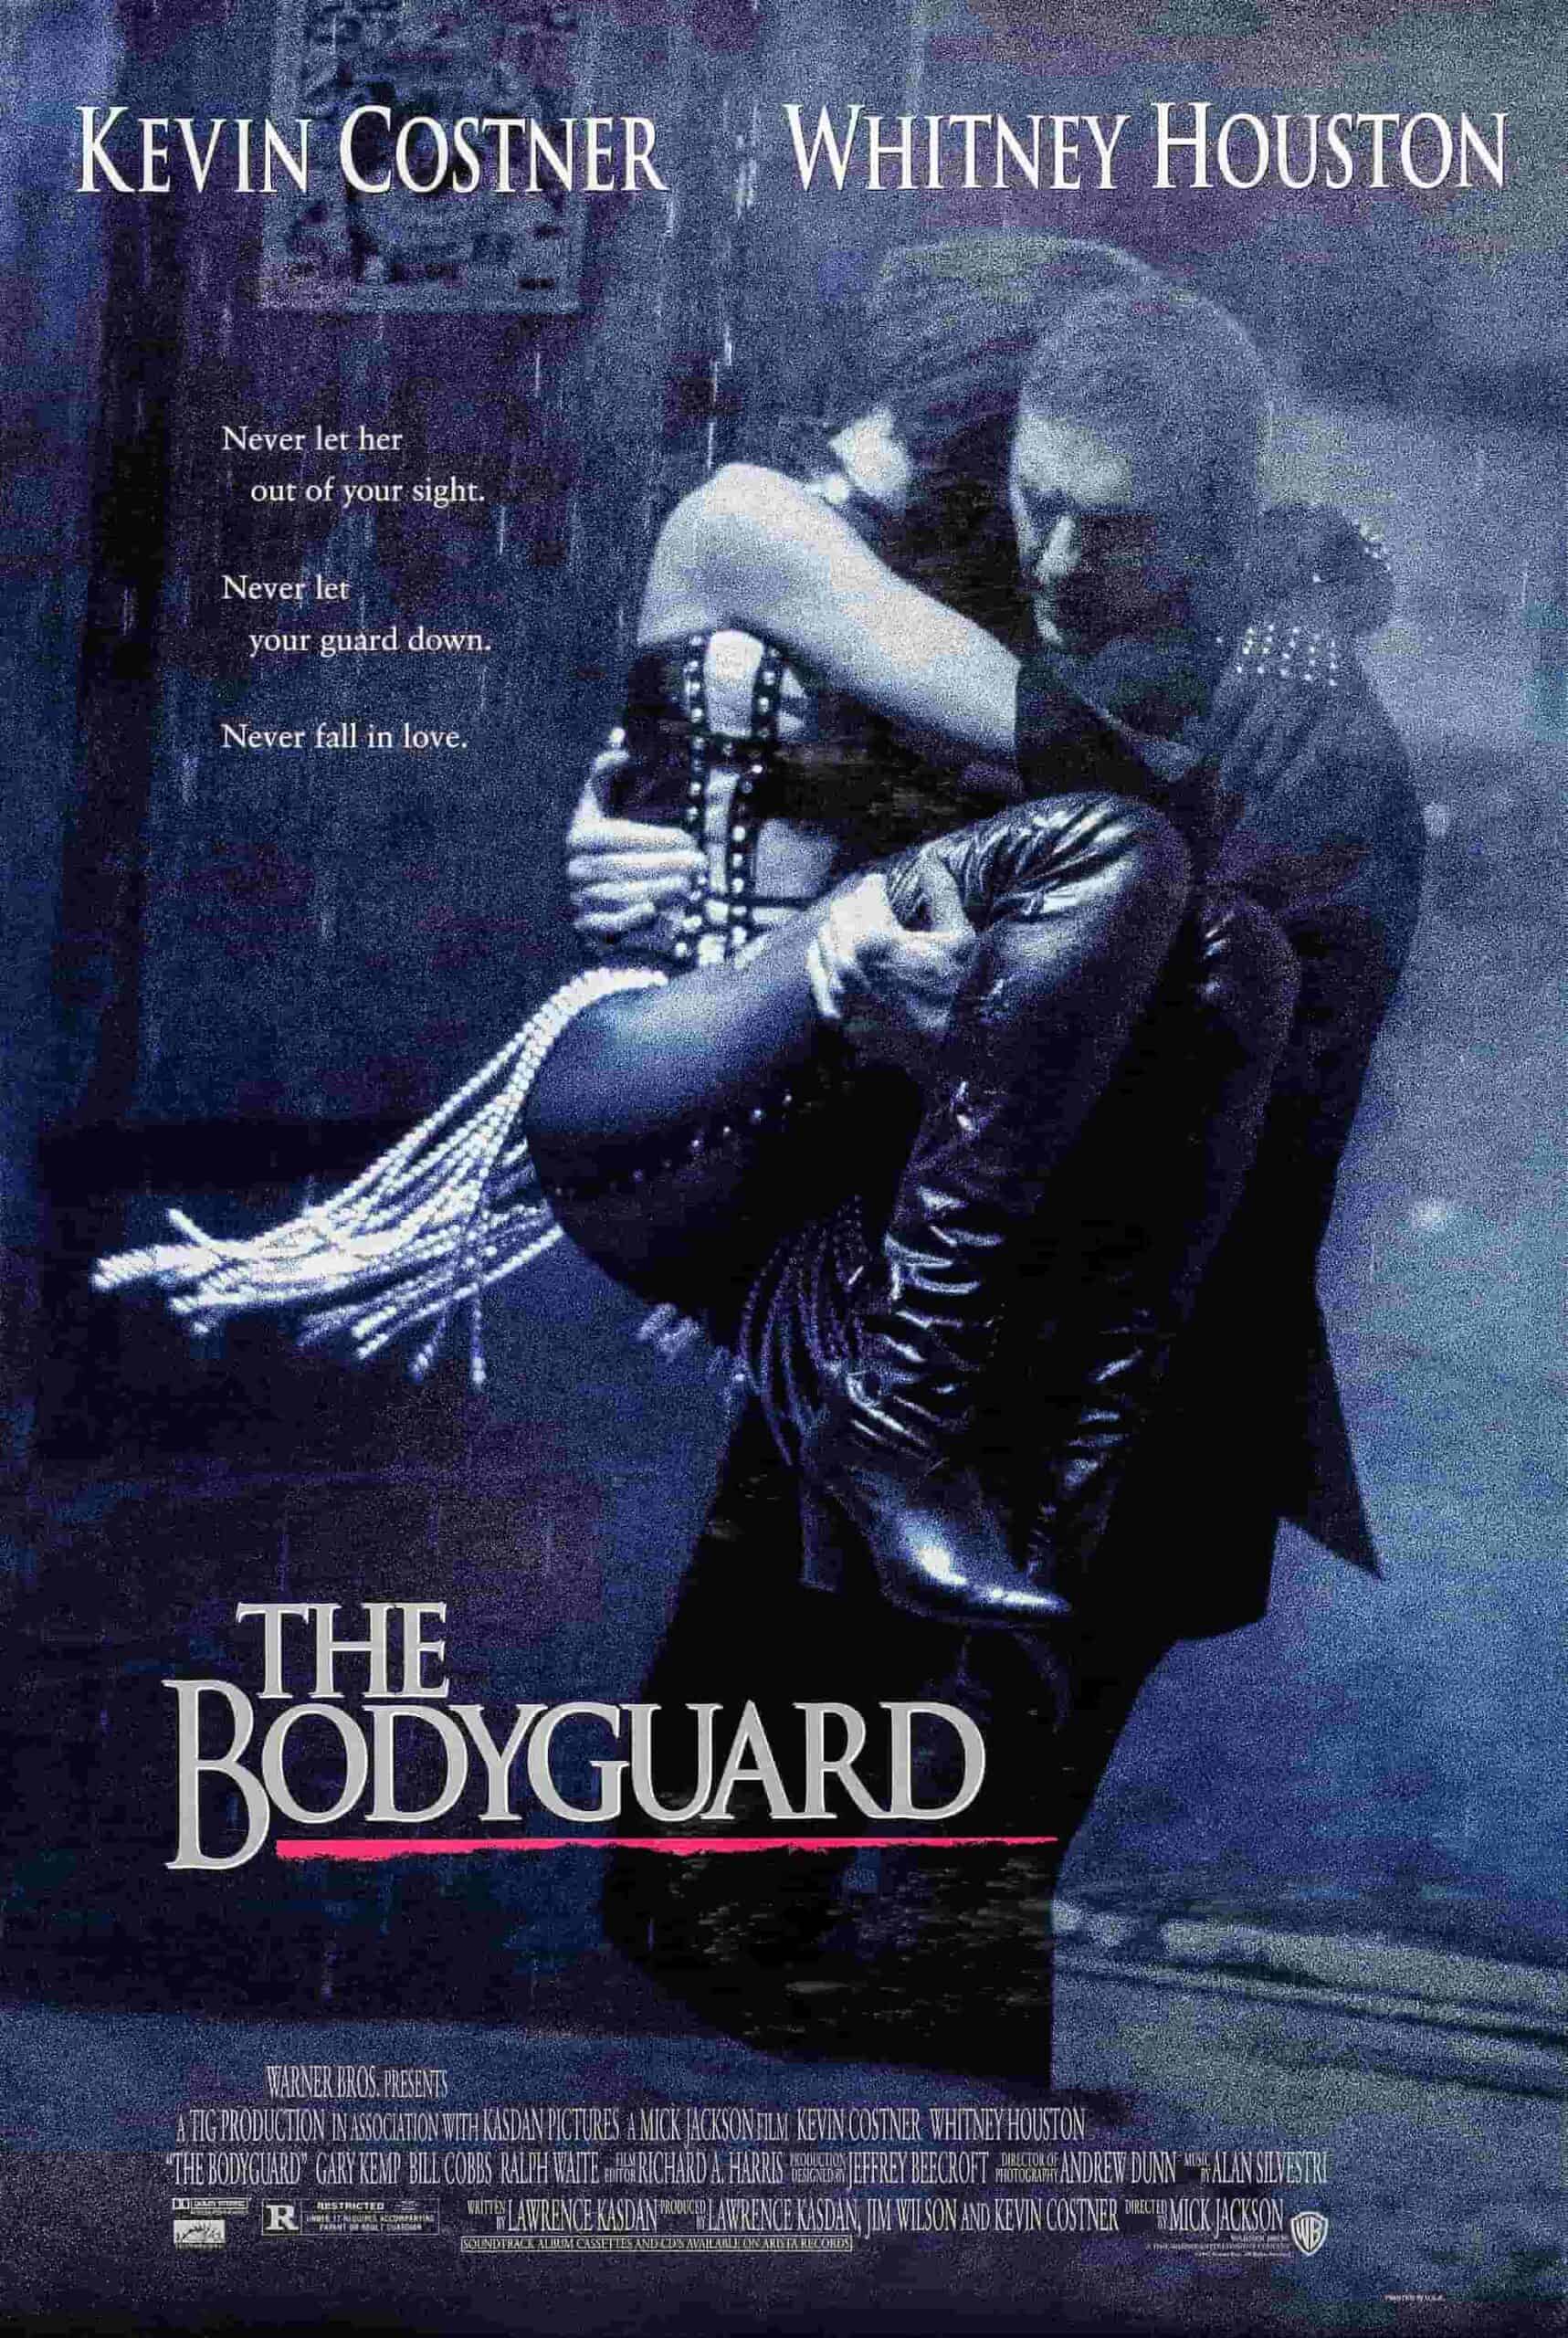 The Bodyguard (1992) 13 Best Action Romance Movies